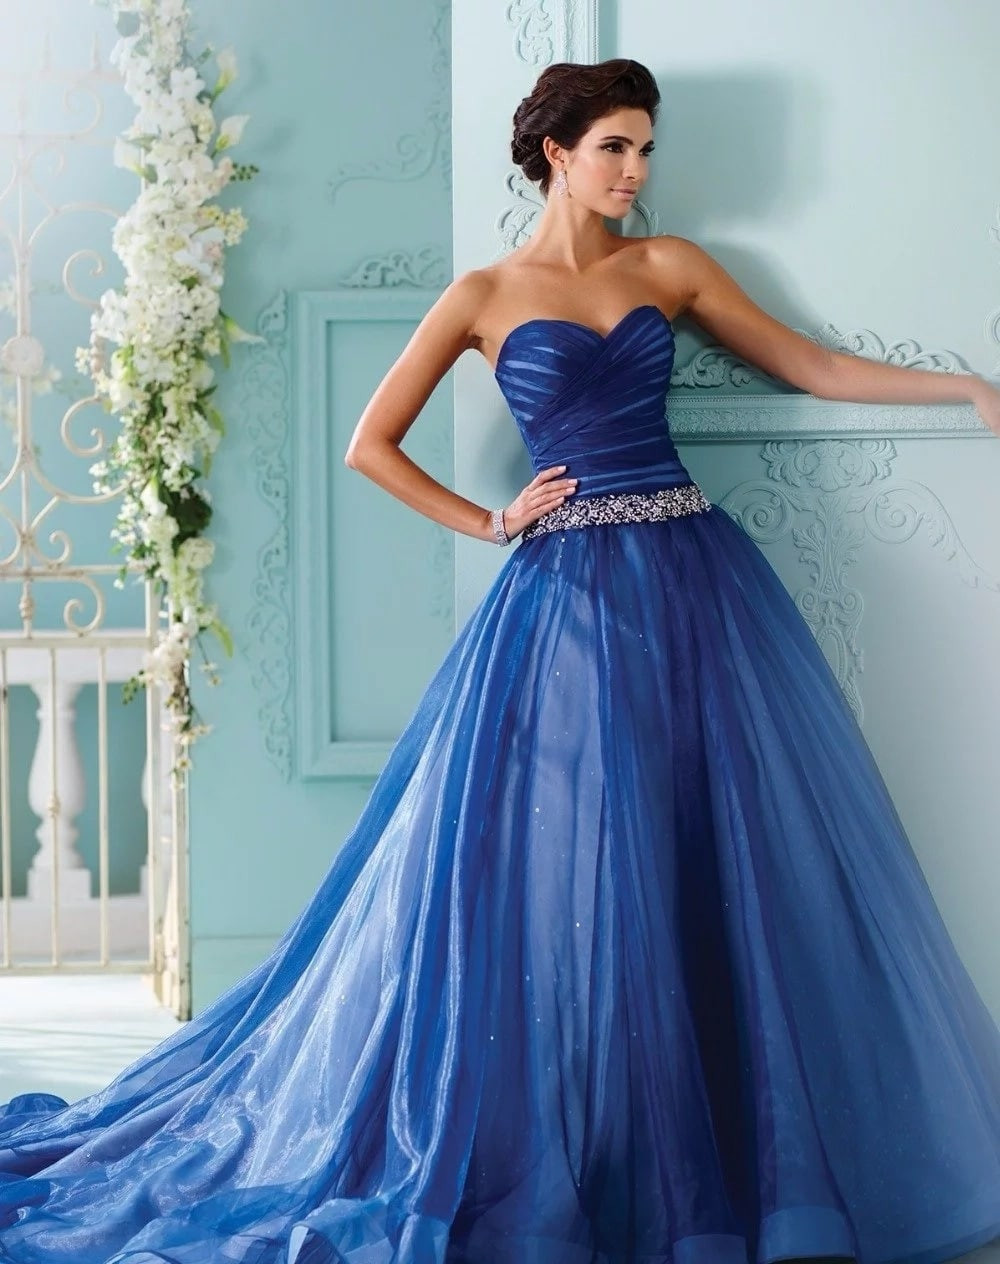 Wedding Dress Color Meanings
 10 wedding dress colors and their meanings around the